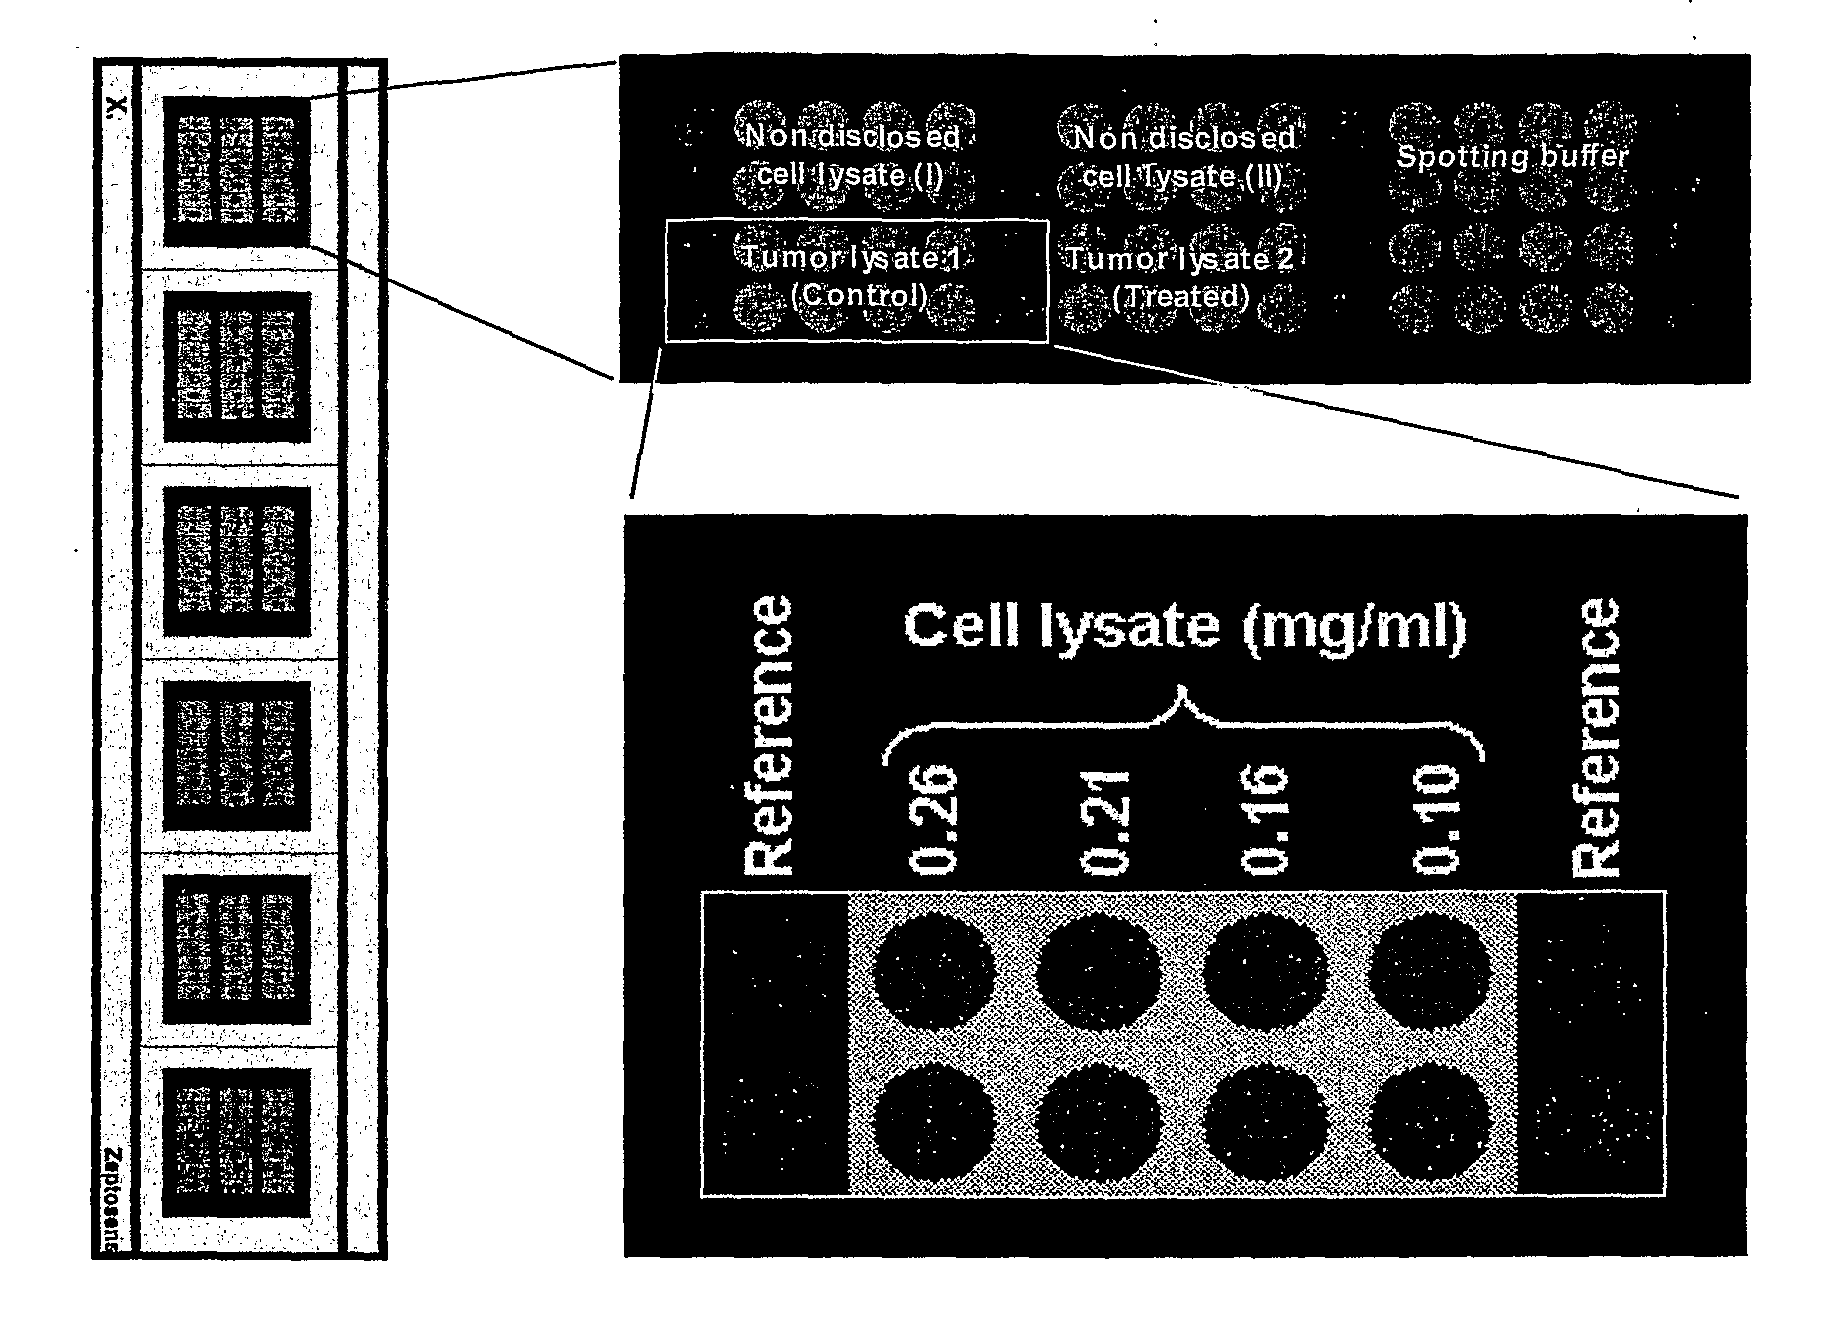 Analytical Platform and Method for Generating Protein Expression Profiles of Cell Populations